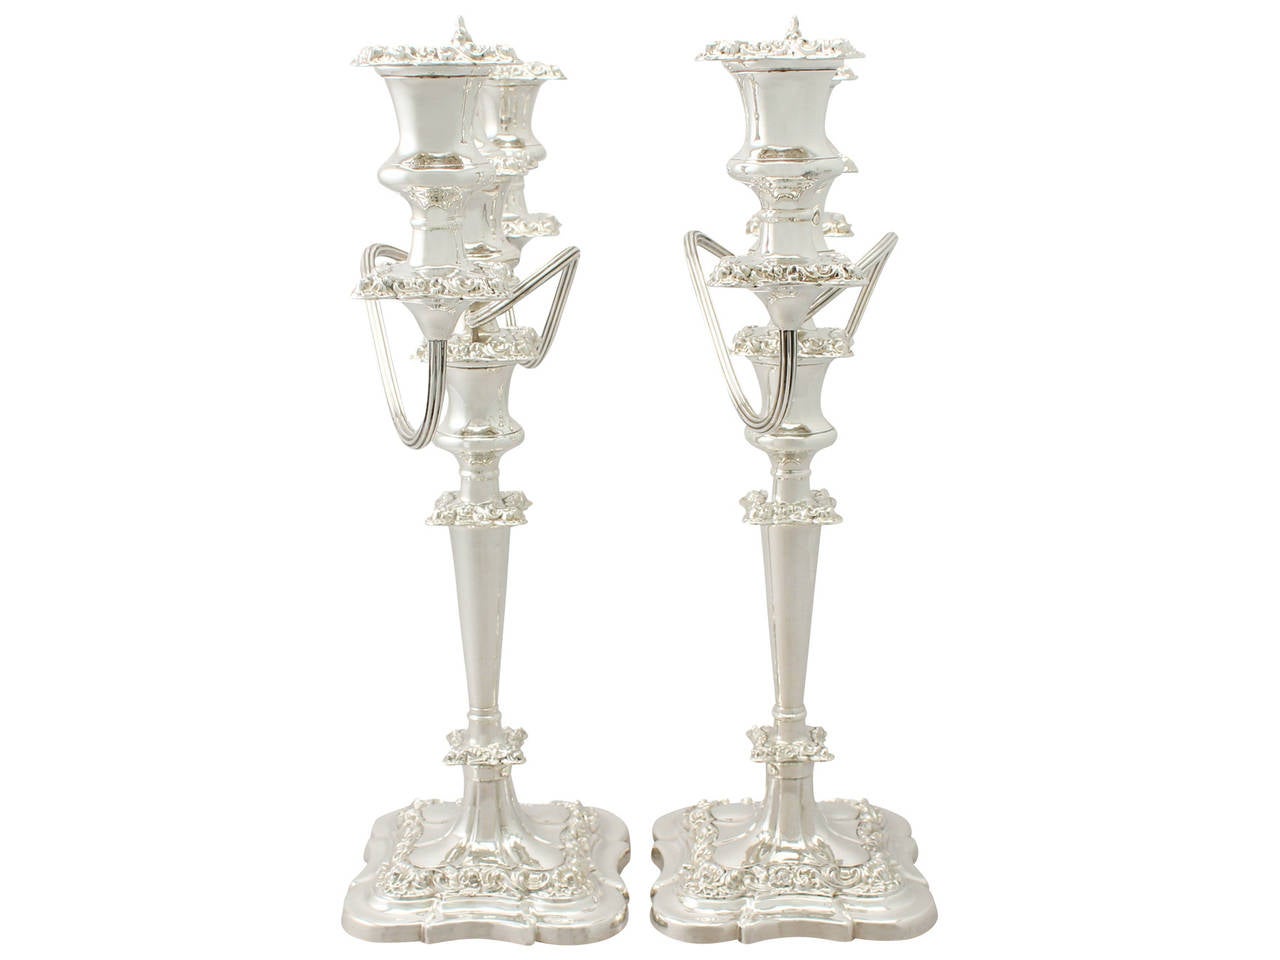 A fine and impressive pair of vintage Elizabeth II English sterling silver three light candelabra; an addition to our ornamental silverware collection.

These fine vintage Elizabeth II sterling silver three light candelabra have plain circular